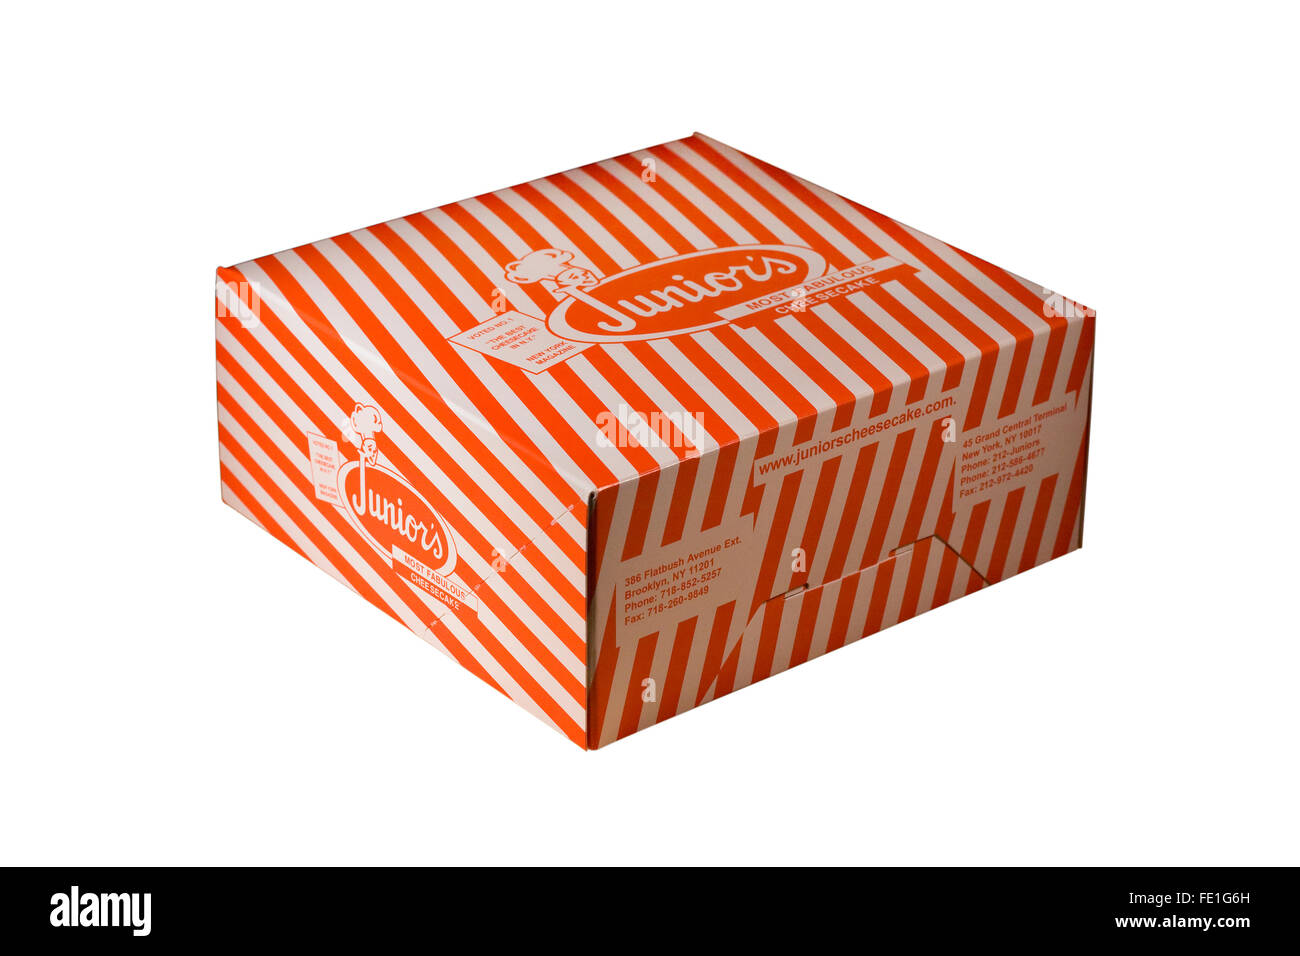 Cut Out. Striped Junior's Cheesecake Box from New York City on white background Stock Photo